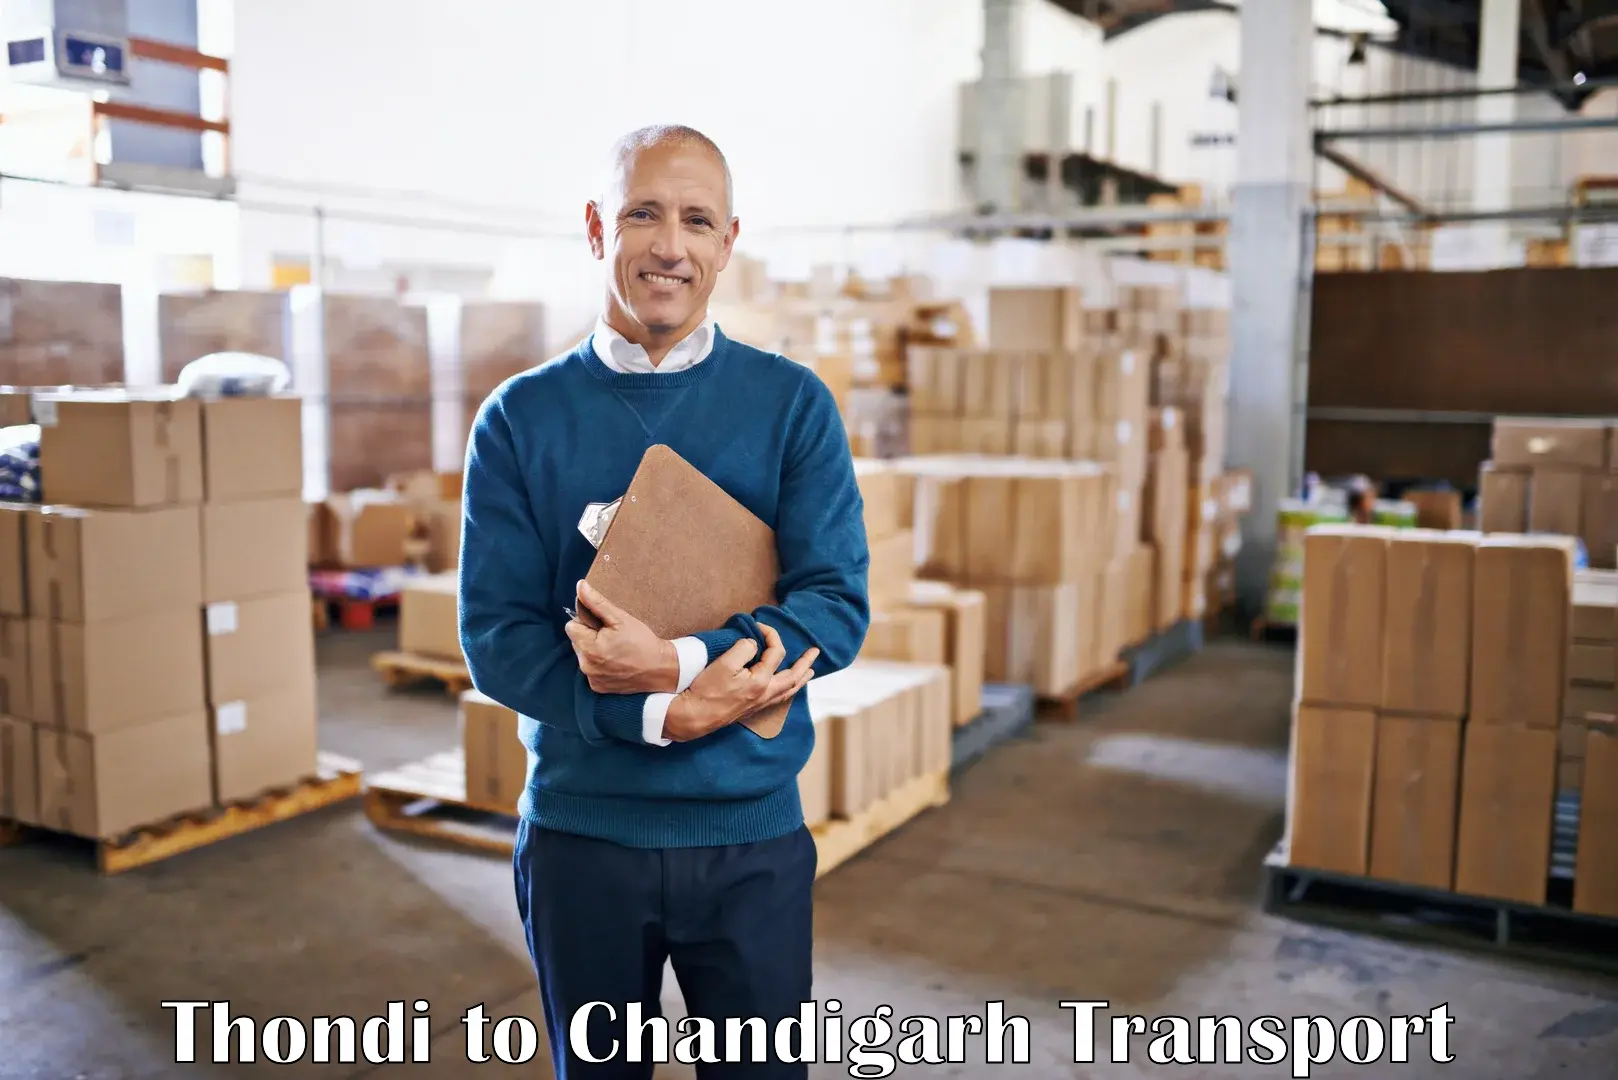 Two wheeler parcel service Thondi to Chandigarh